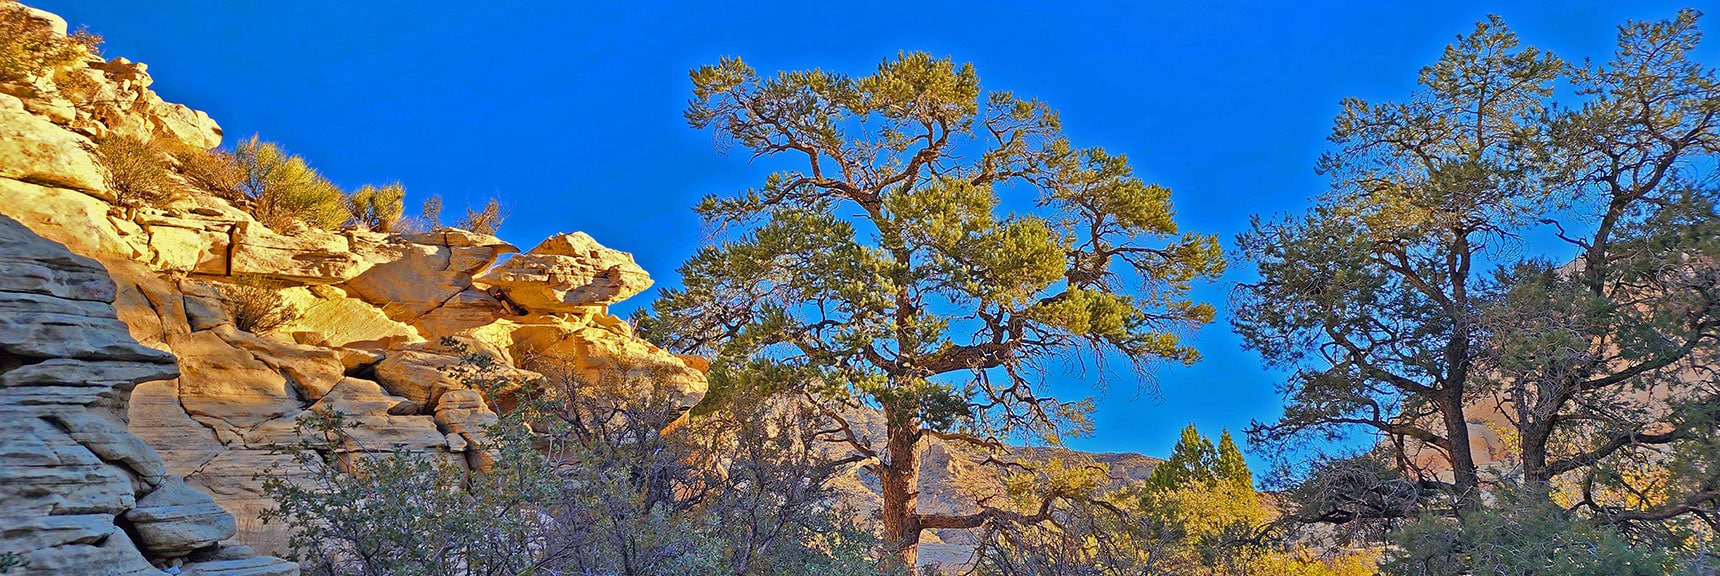 Many of the Plants and Trees So Artfully Placed Would Make a Bonsai Gardener Proud. | Calico Tanks | Red Rock Canyon National Conservation Area, Nevada